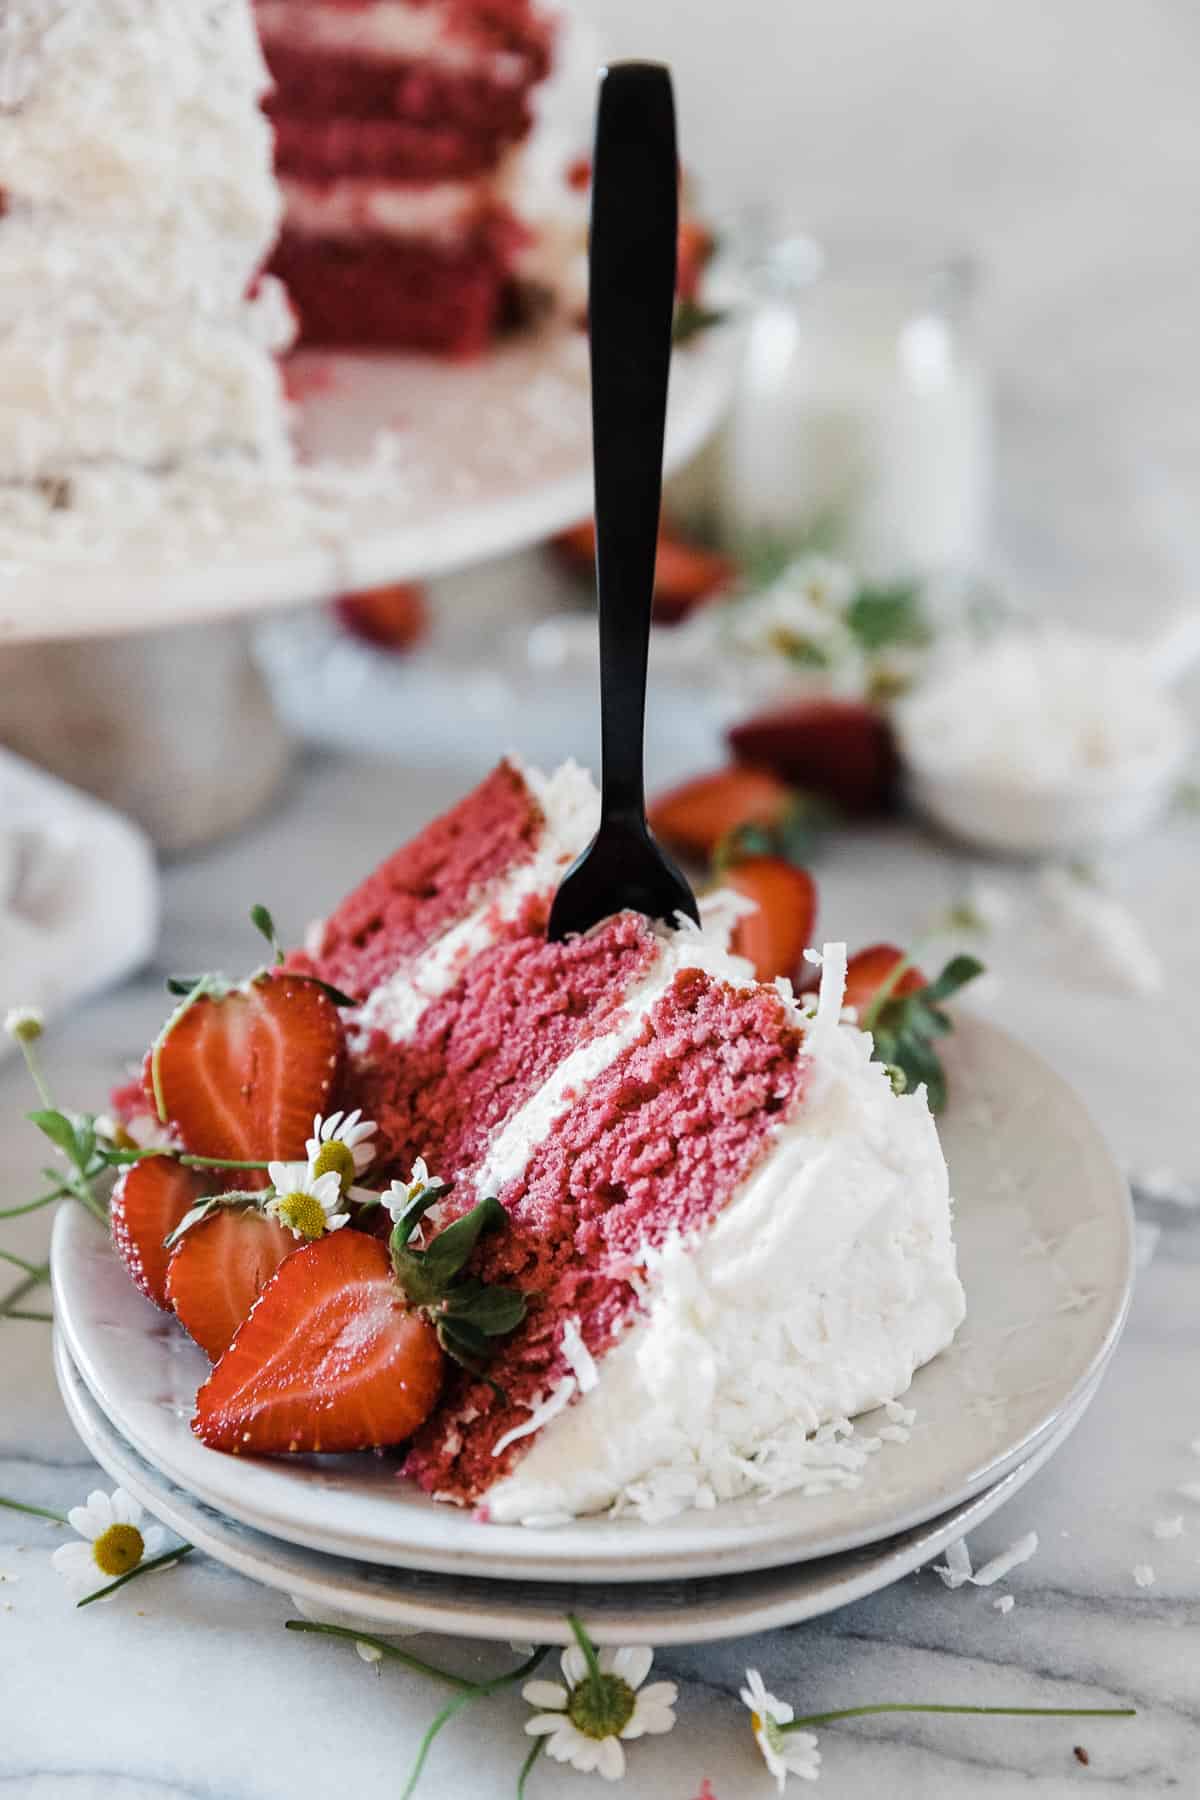 A large slice of strawberry coconut cake on a white dessert plate. There is a black fork stuck into the slice.